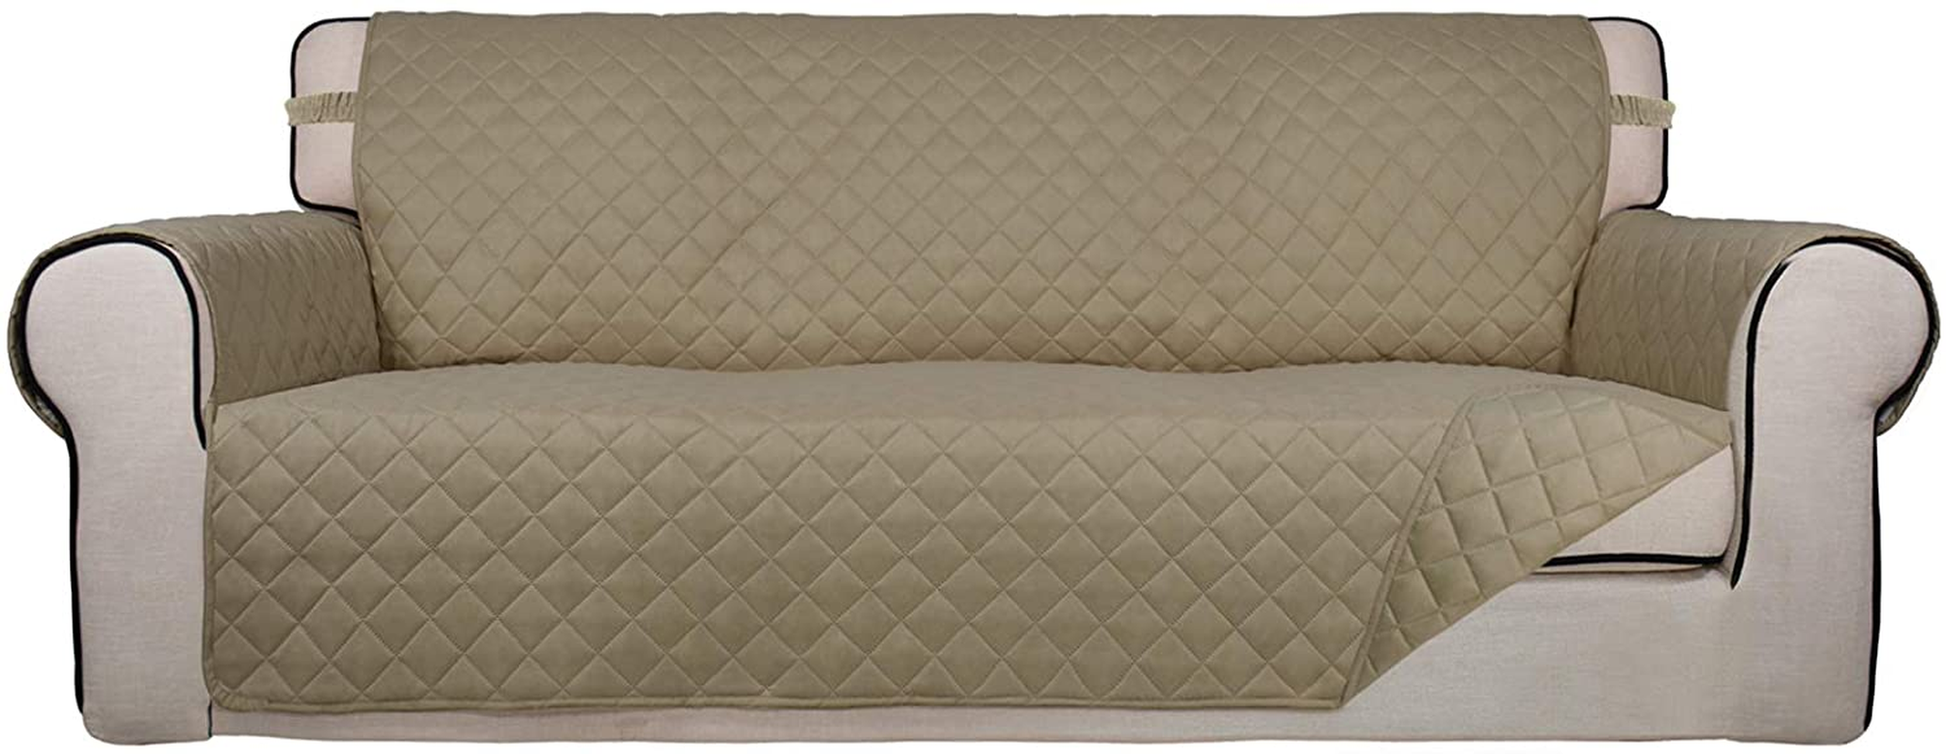 Reversible Quilted Sofa Cover, Water Resistant Slipcover Furniture Protector, Washable Couch Cover with Non Slip Foam and Elastic Straps for Kids, Dogs, Pets (Sofa, Beige/Beige)